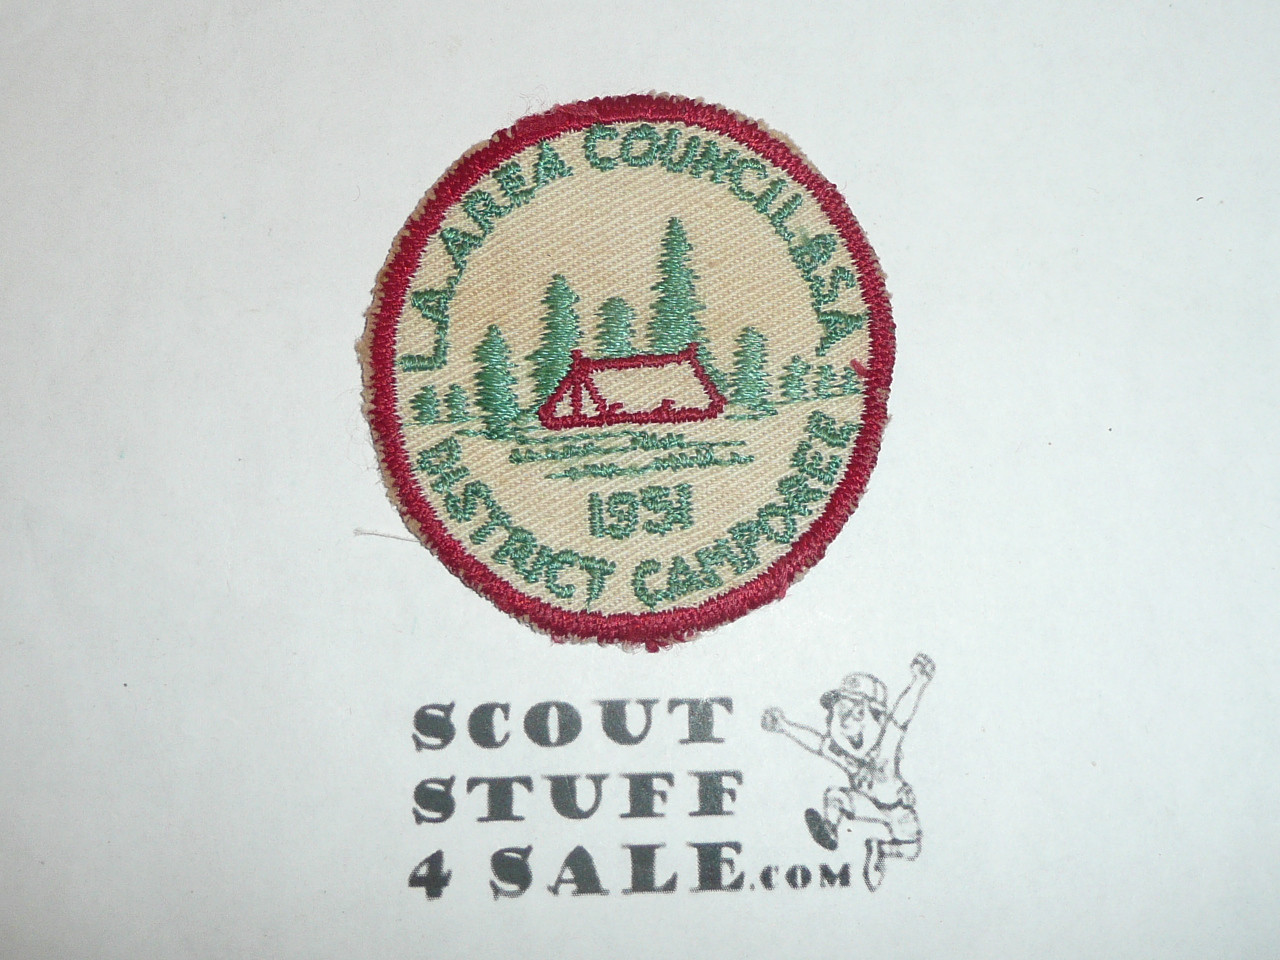 Camporee twill Patch, Los Angeles Area Council, red c/e bdr, 1951